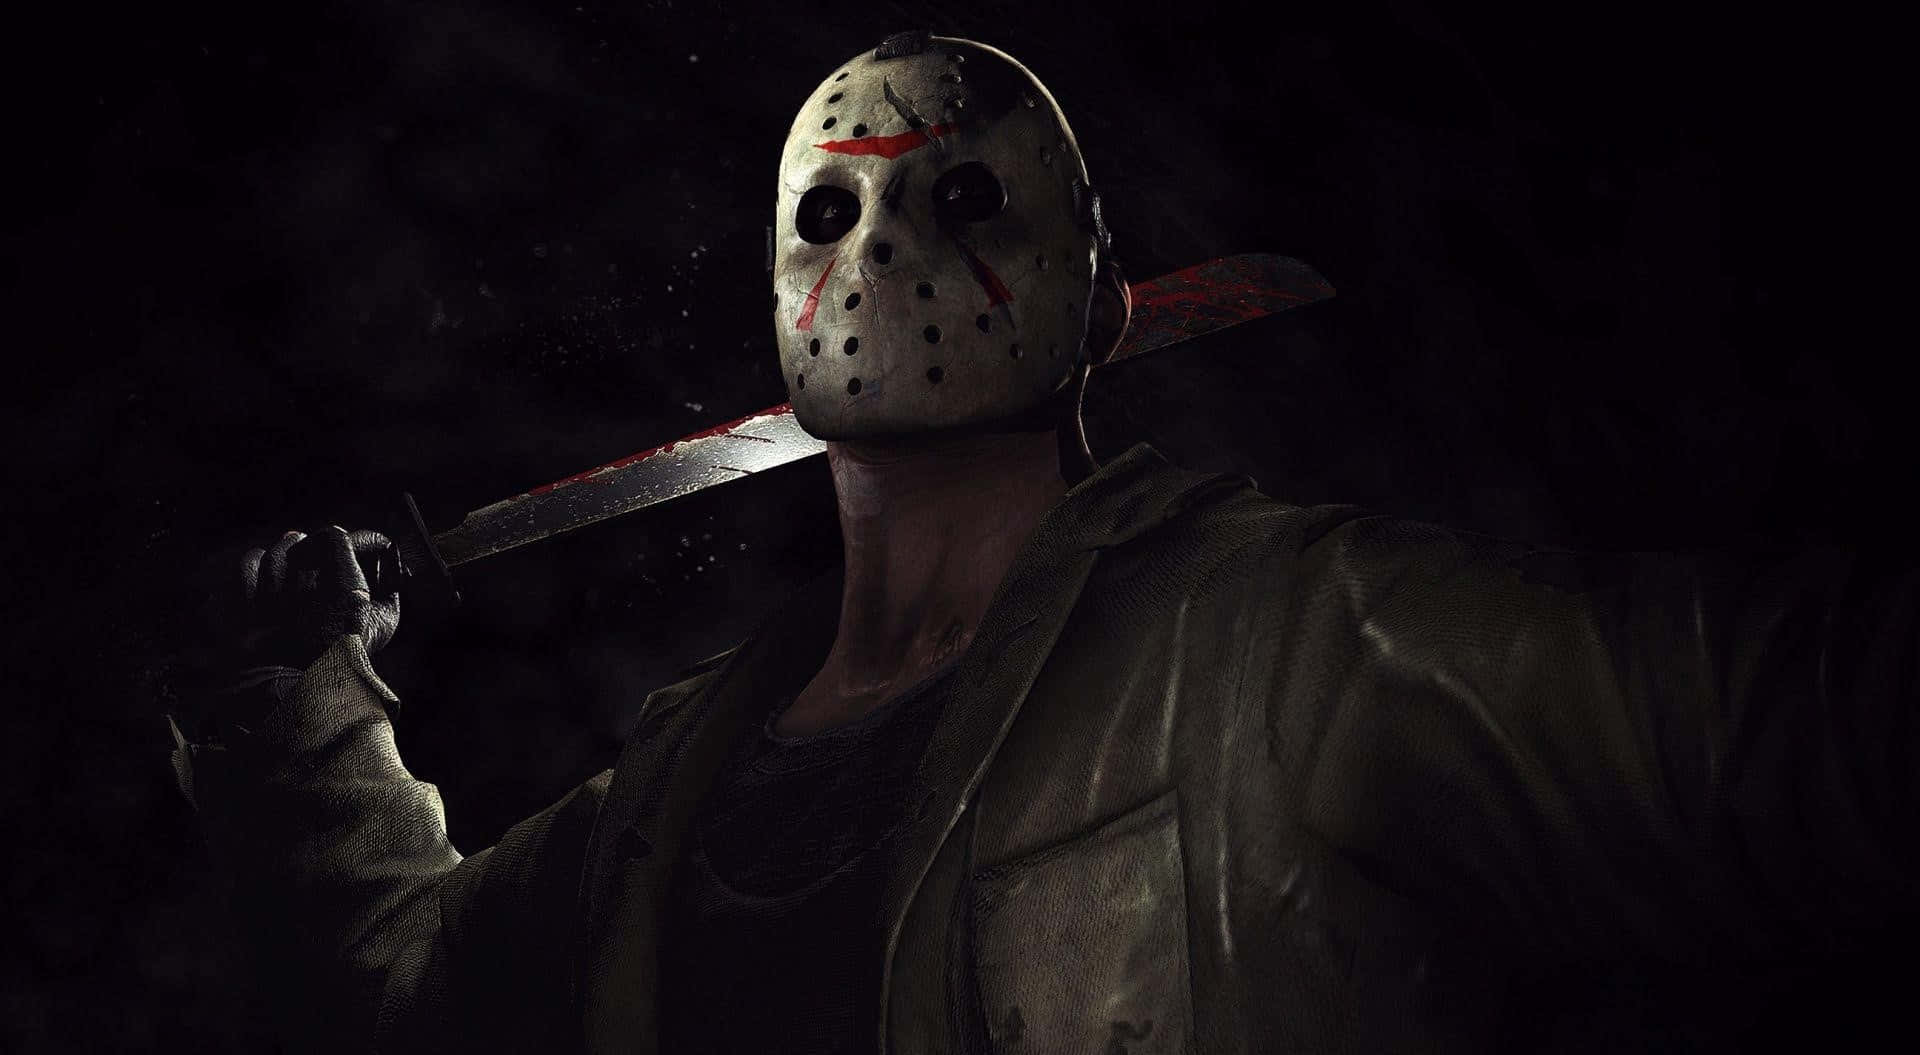 Image  Jason Voorhees as seen in Friday the 13th